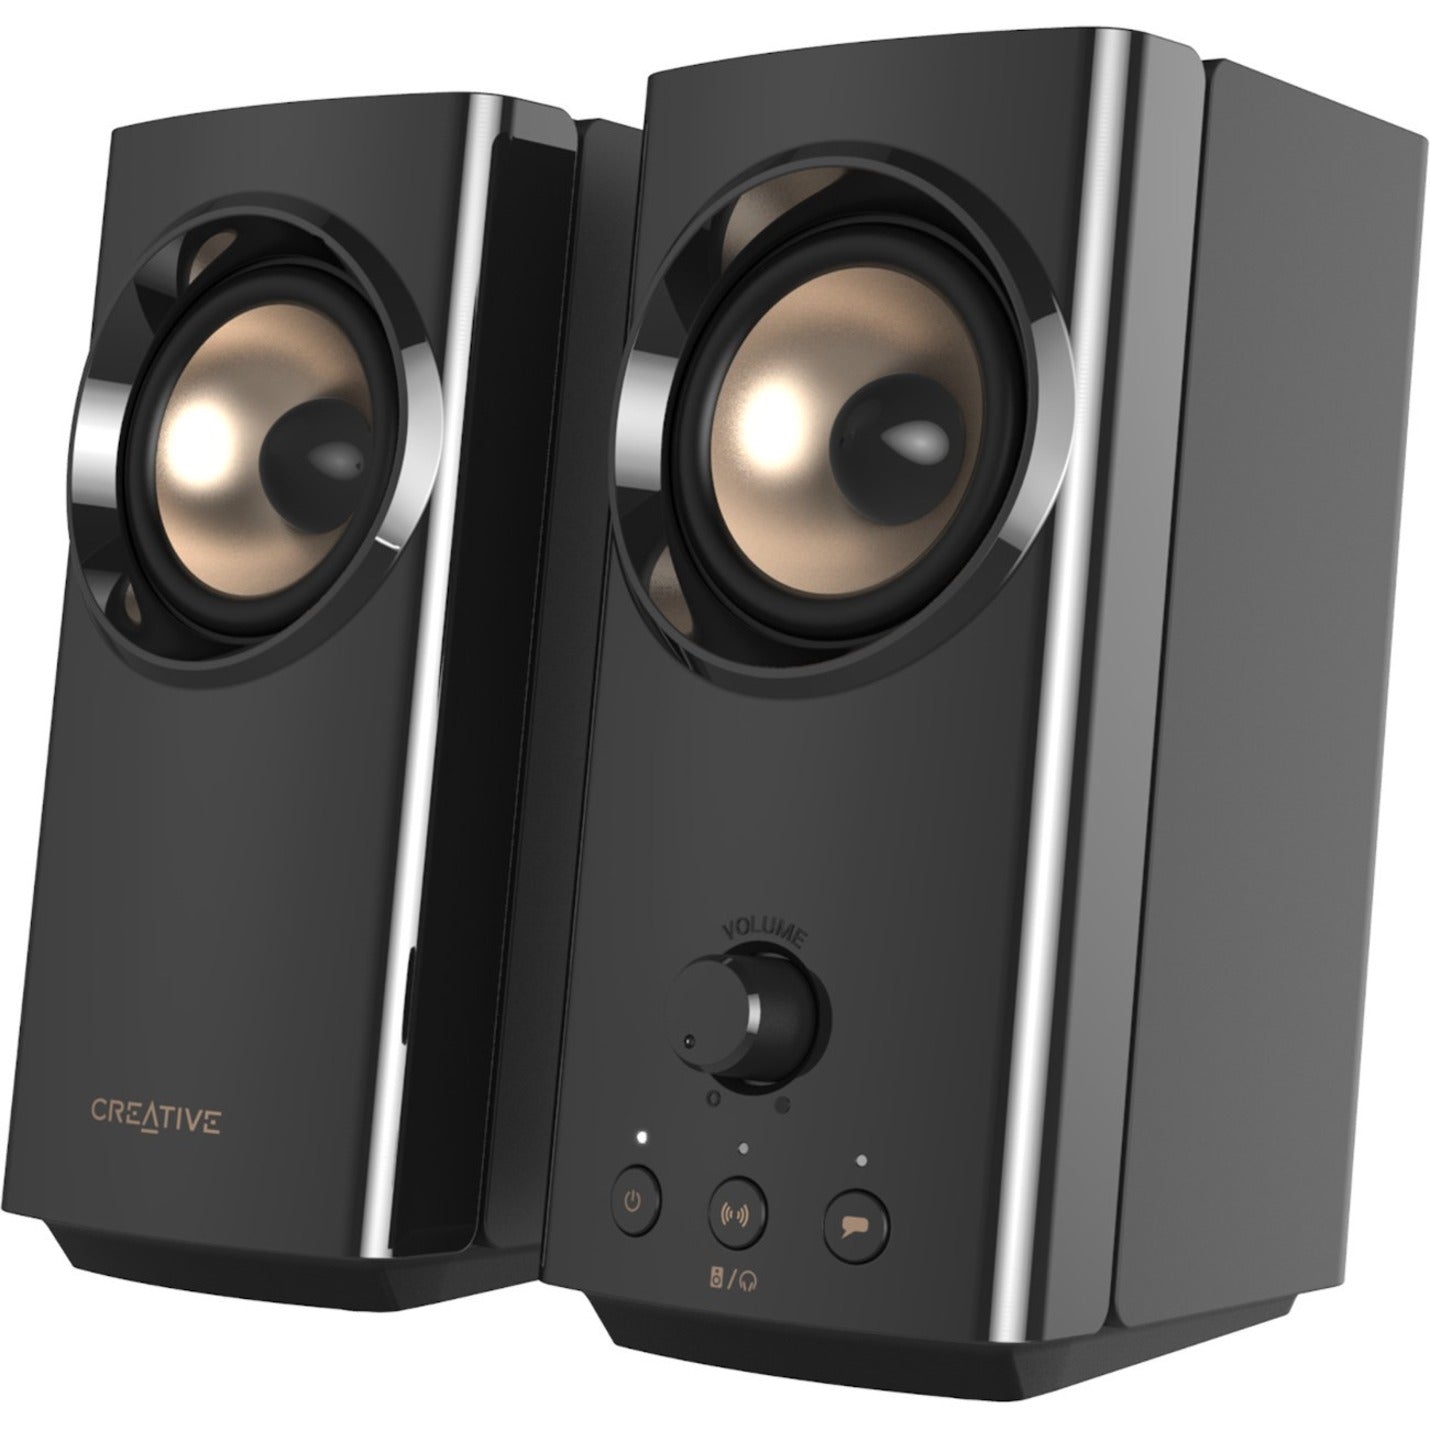 Creative 51MF1705AA000 T60 Speaker System, Wireless 2.0 Speaker with 30W RMS Output Power, BT 5.0 Retail